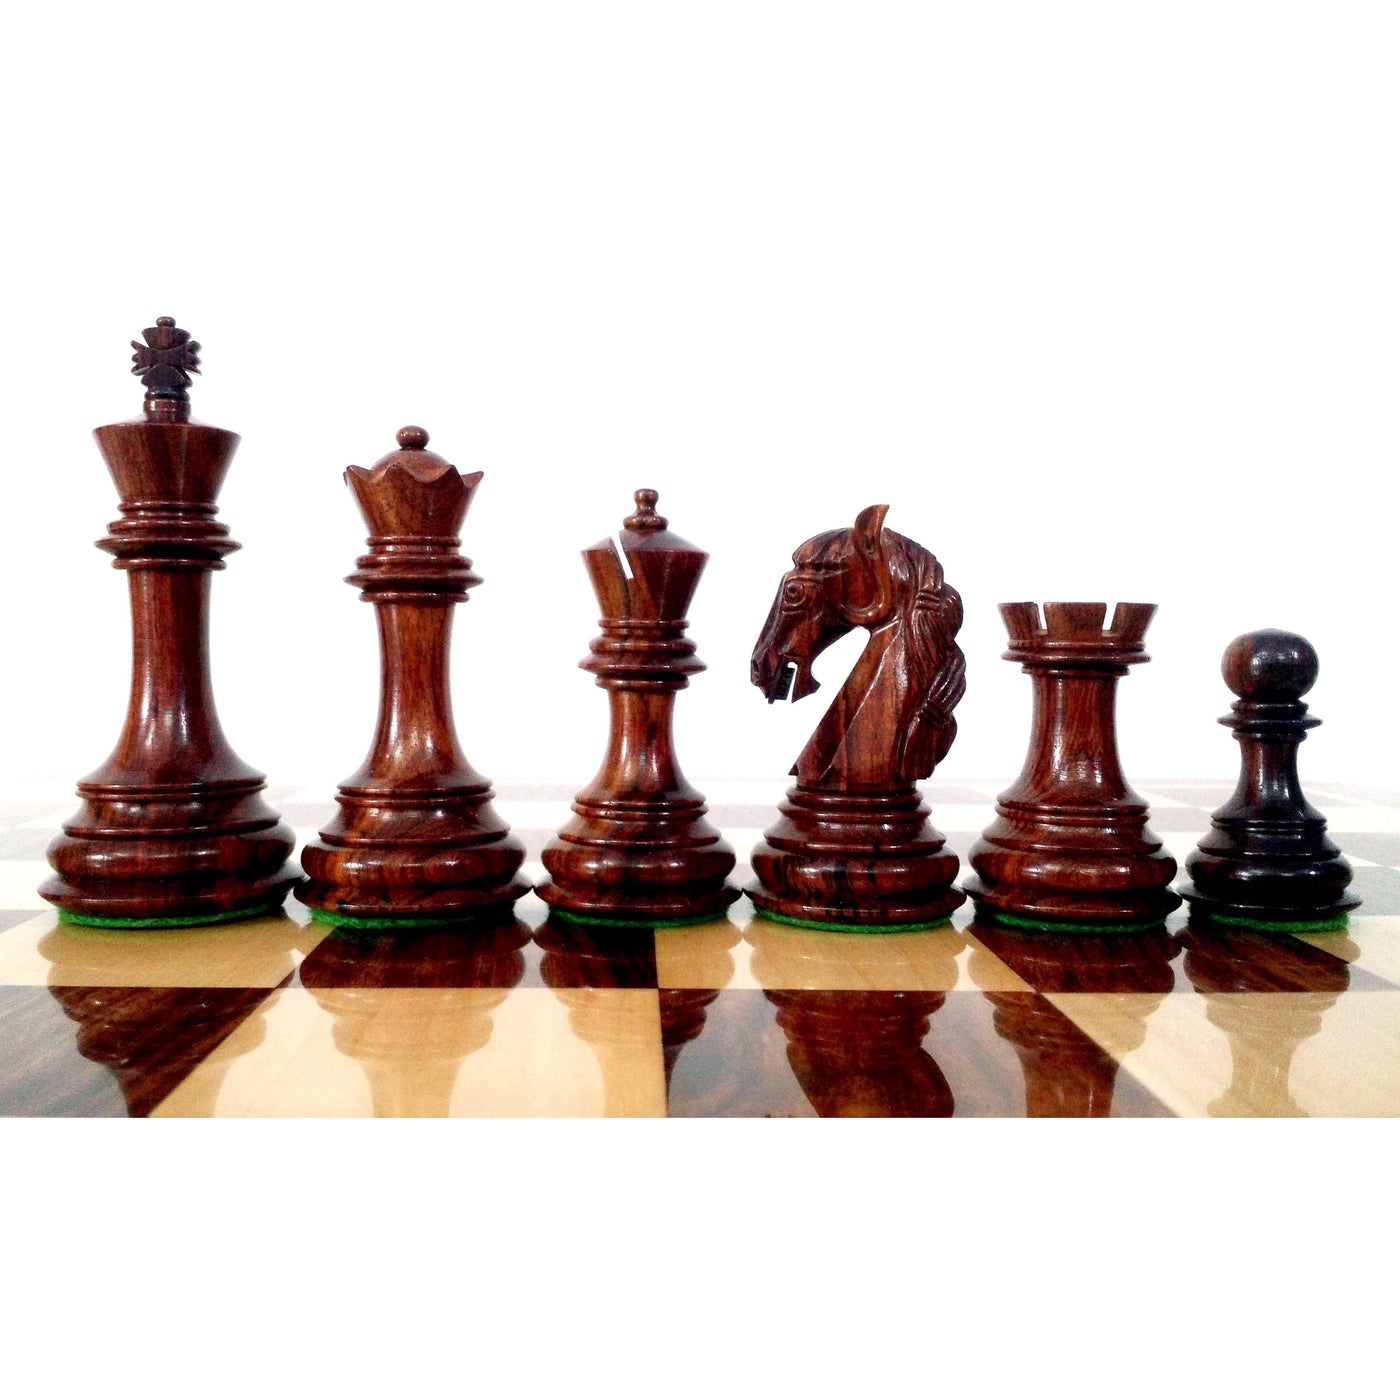 Unique Old Columbian Weighted Chess Pieces set